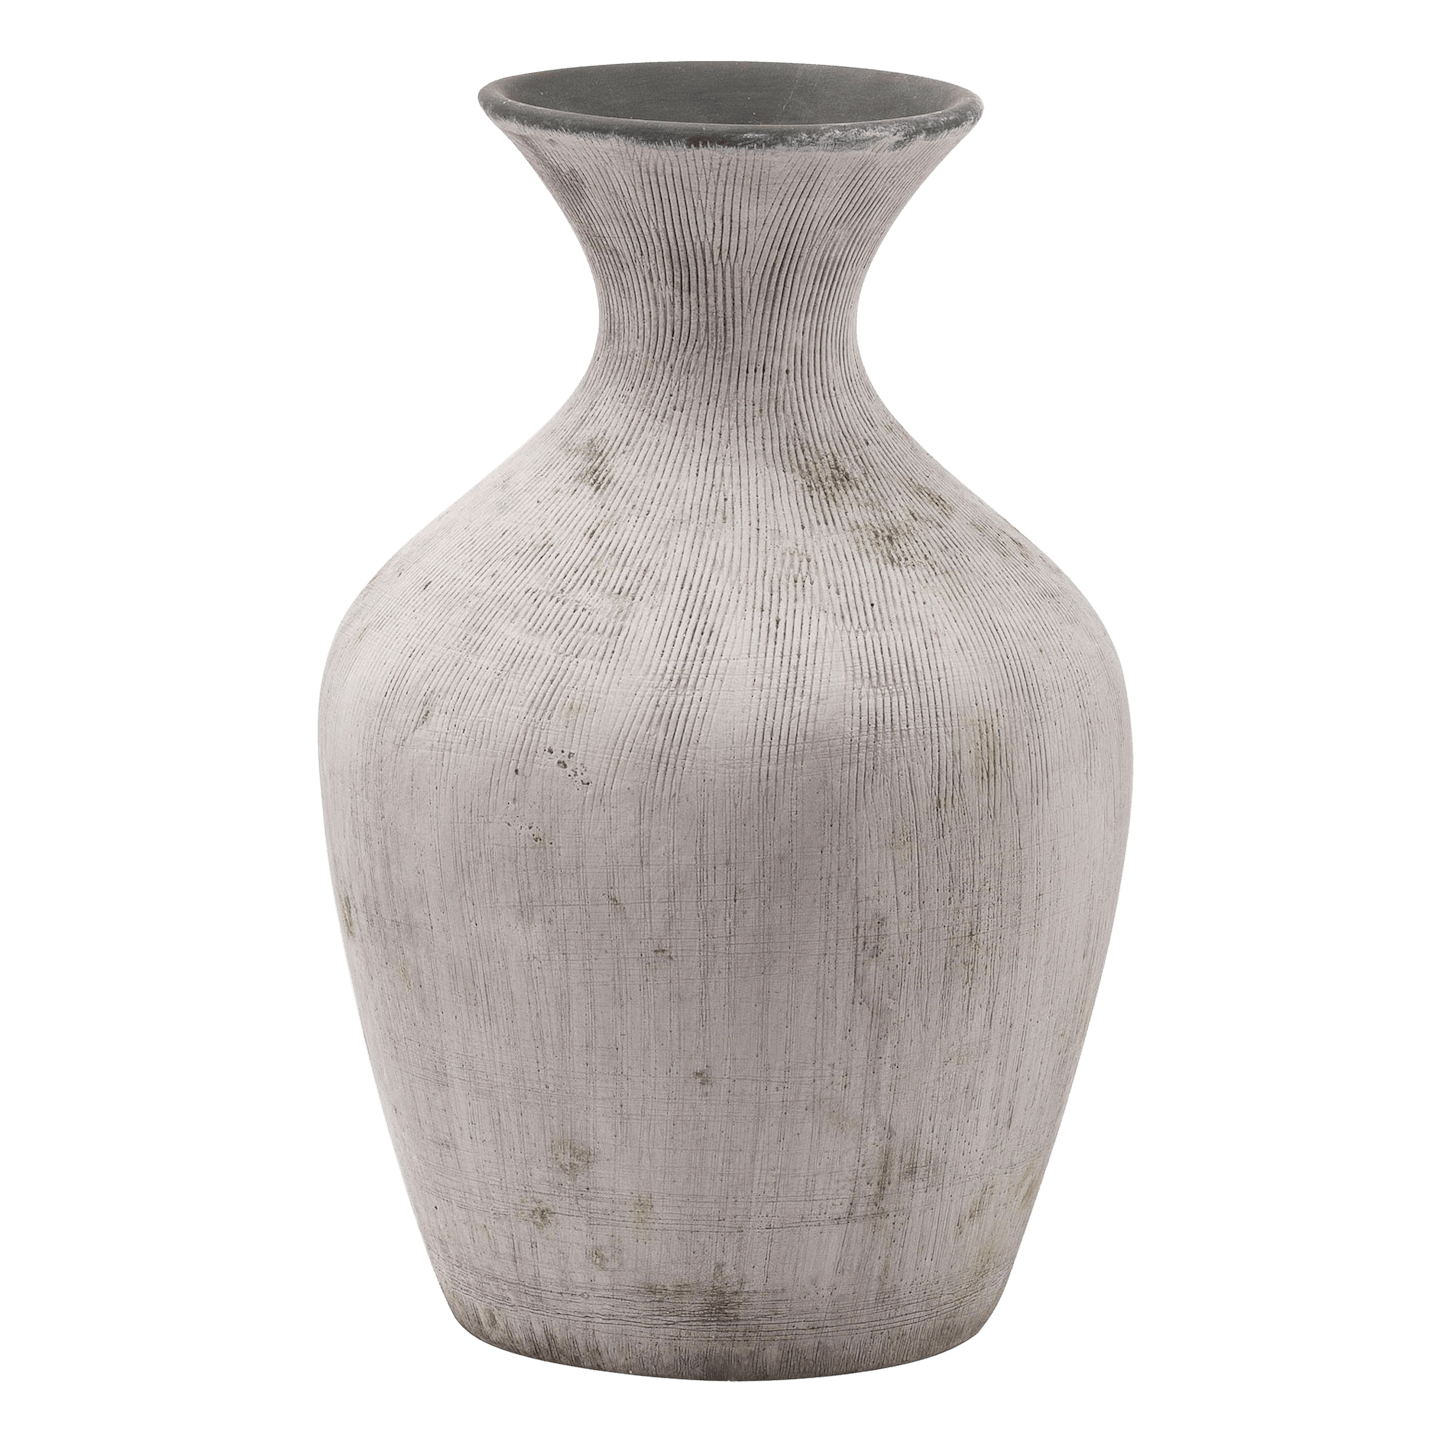 Natural / earthy, tapered stone vase